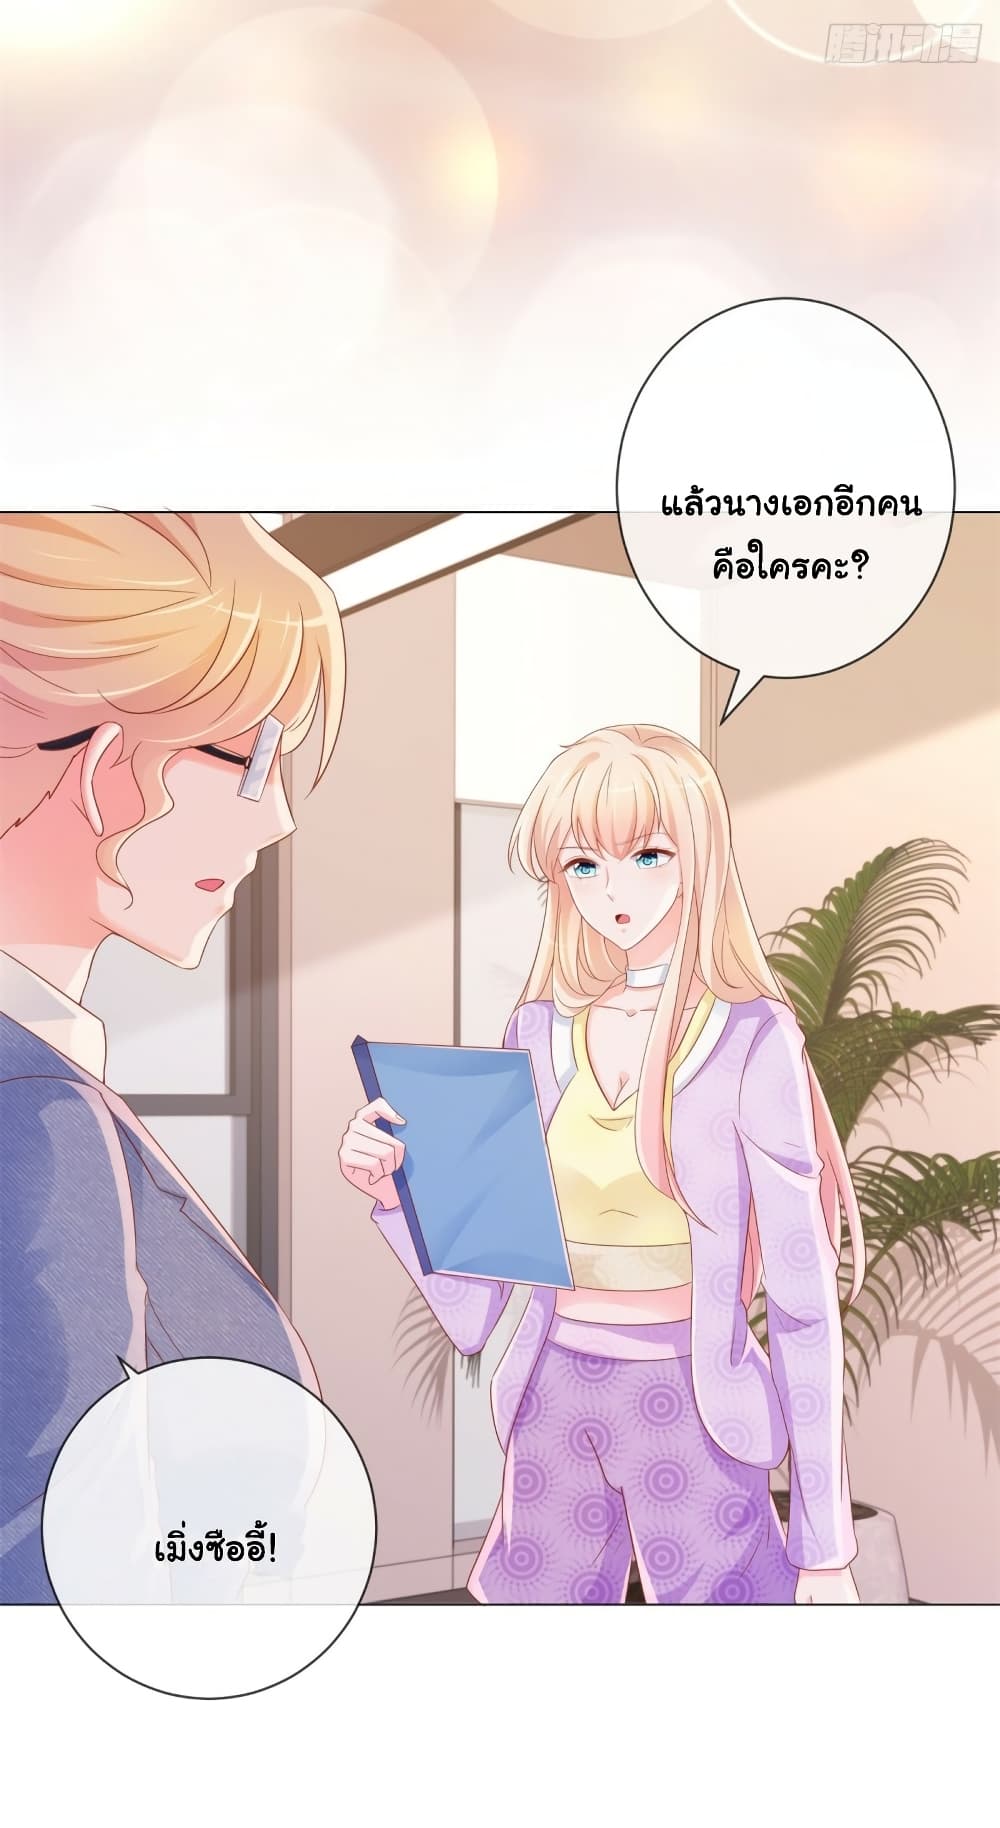 The Lovely Wife And Strange Marriage à¹à¸œà¸™à¸£à¸±à¸à¸¥à¸§à¸‡à¹ƒà¸ˆ 322 (11)